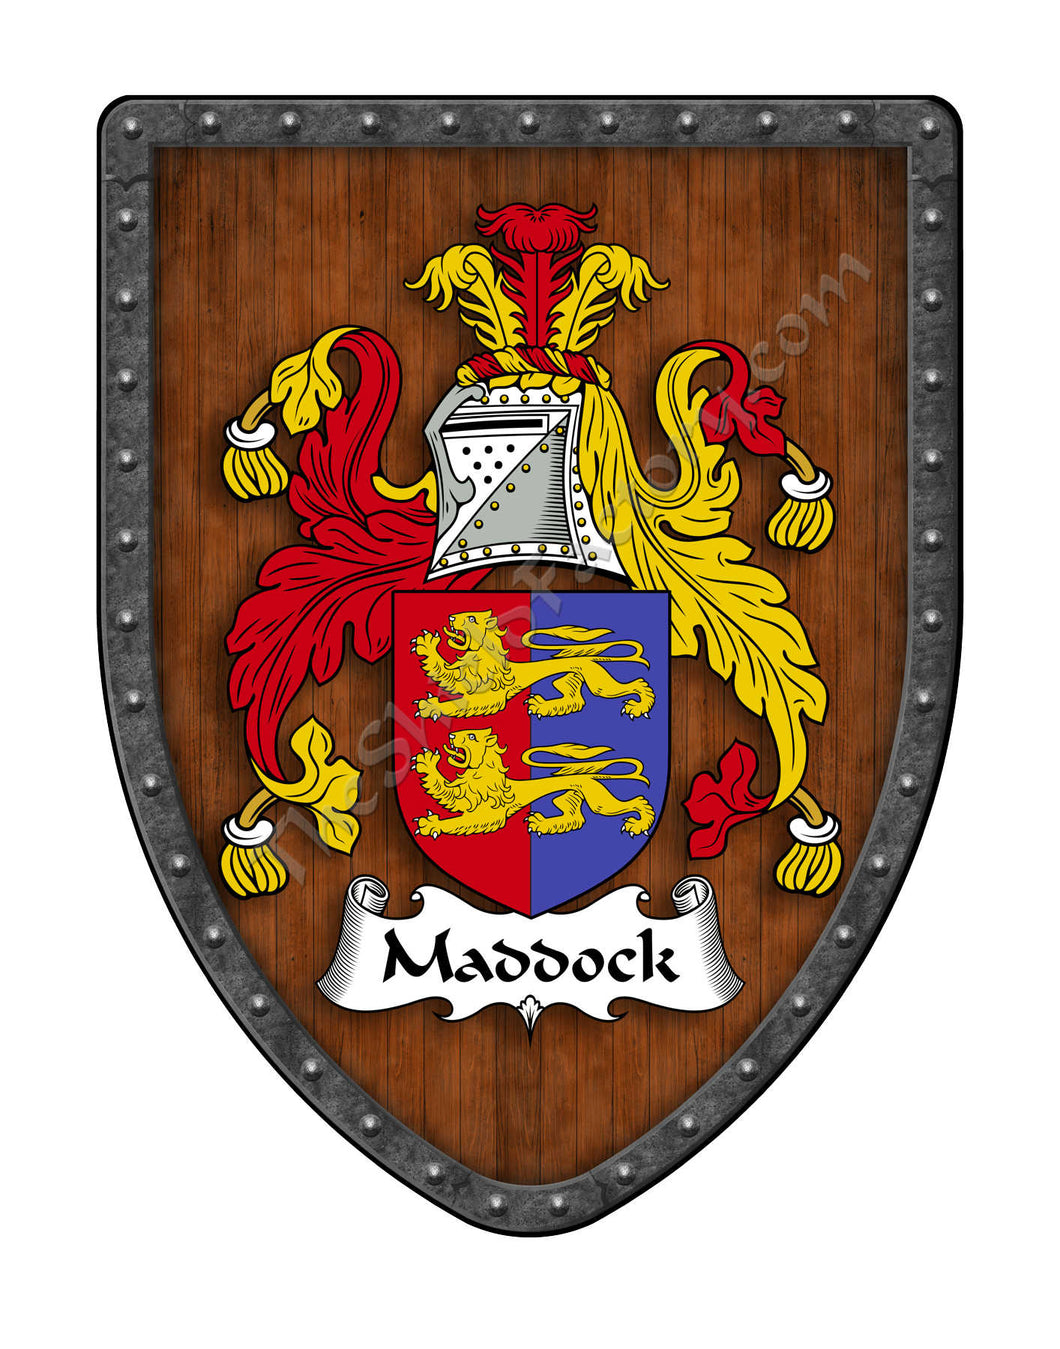 Maddock Coat of Arms Family Crest Shield